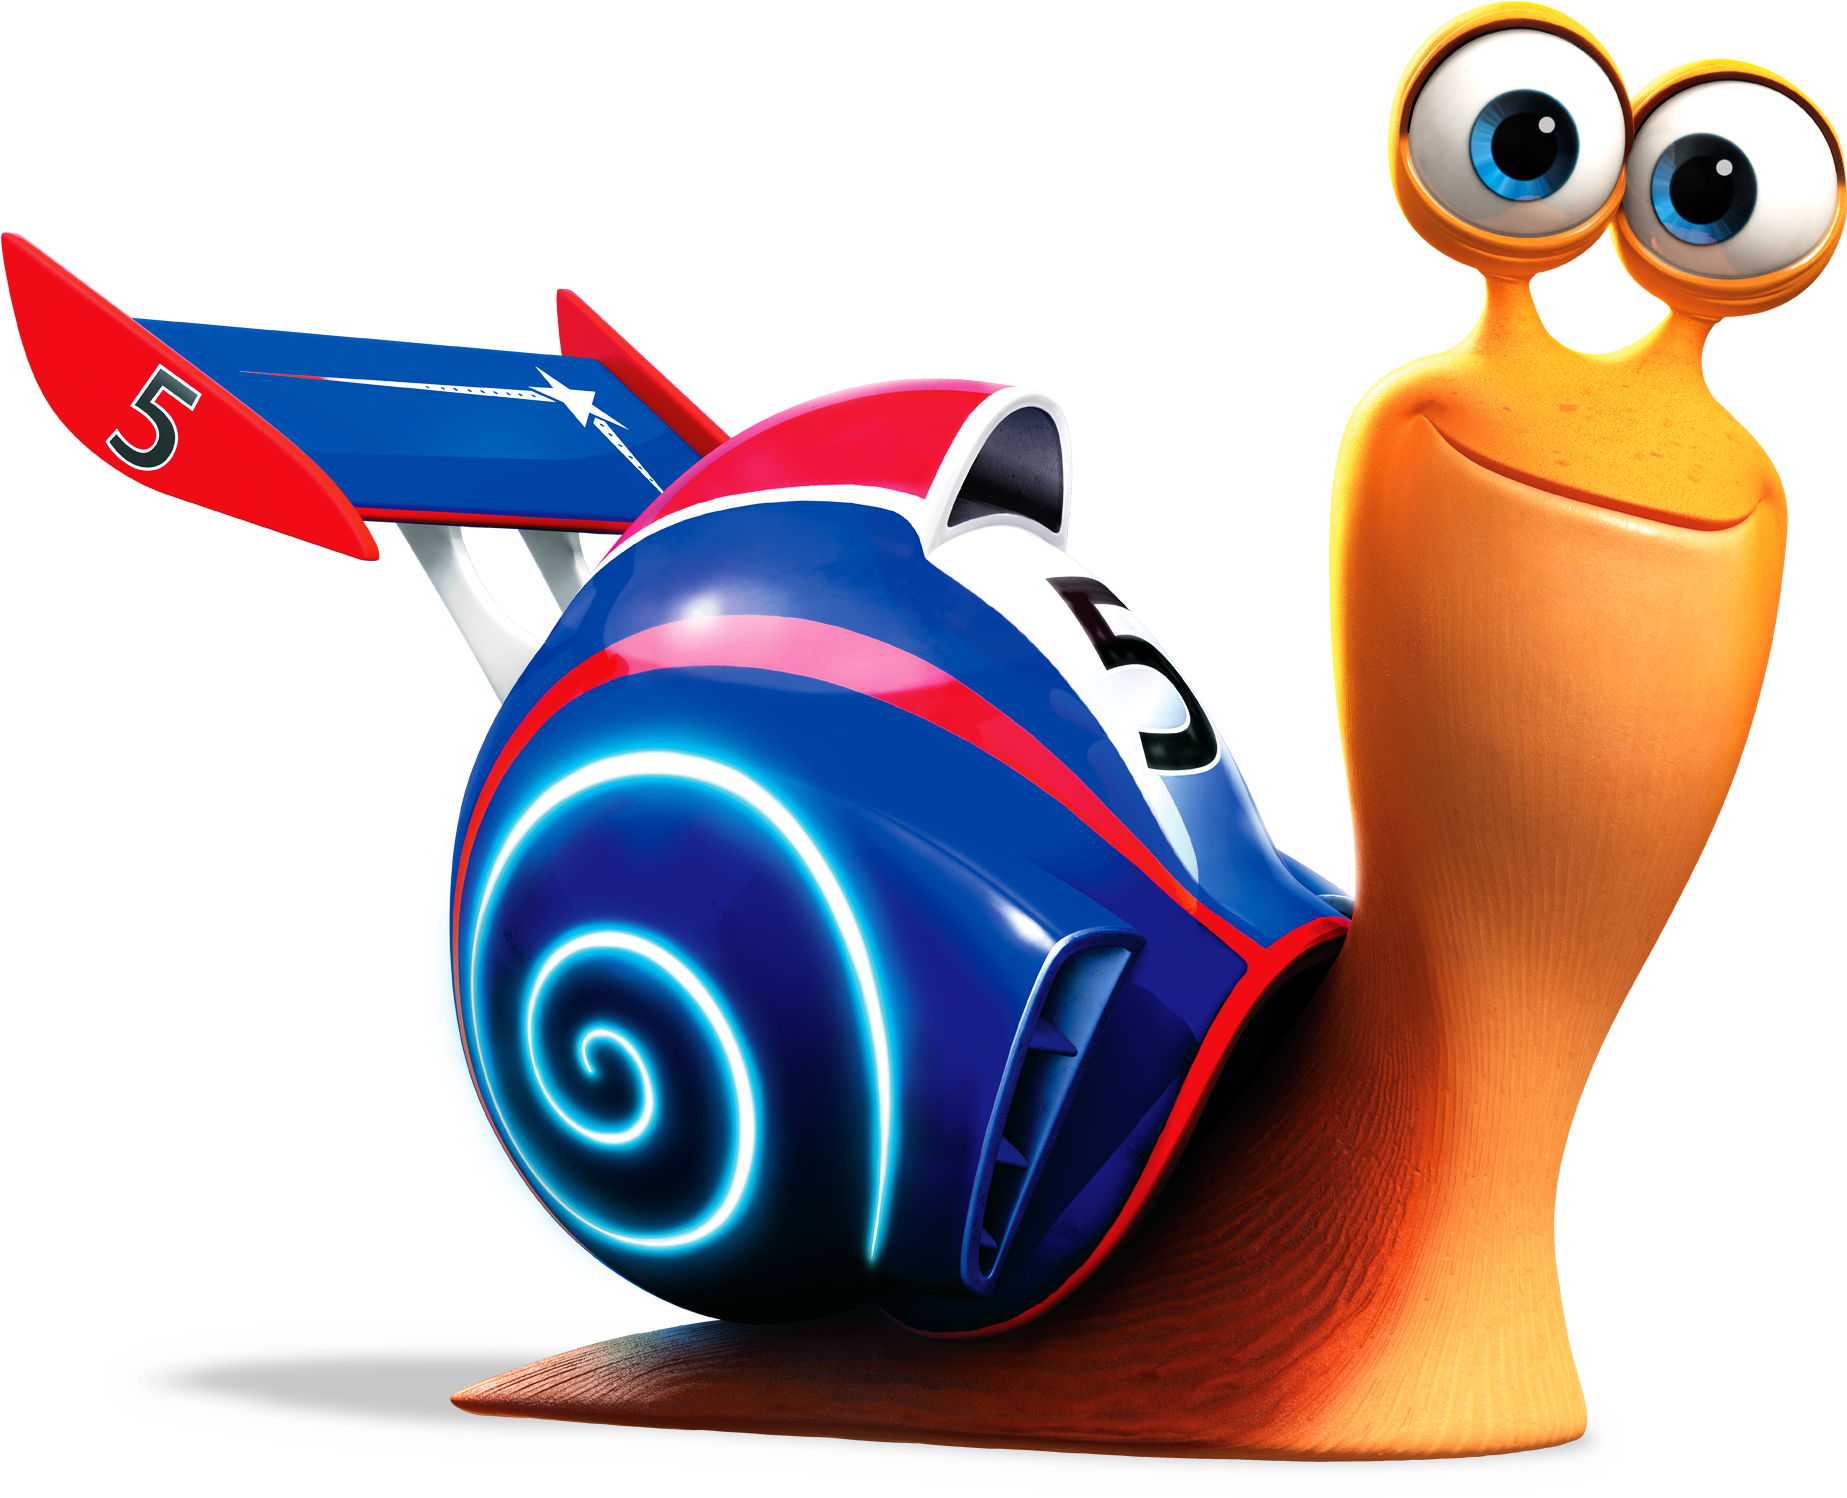 Download and share clipart about Turbo - Turbo Snail, Find more high qualit...